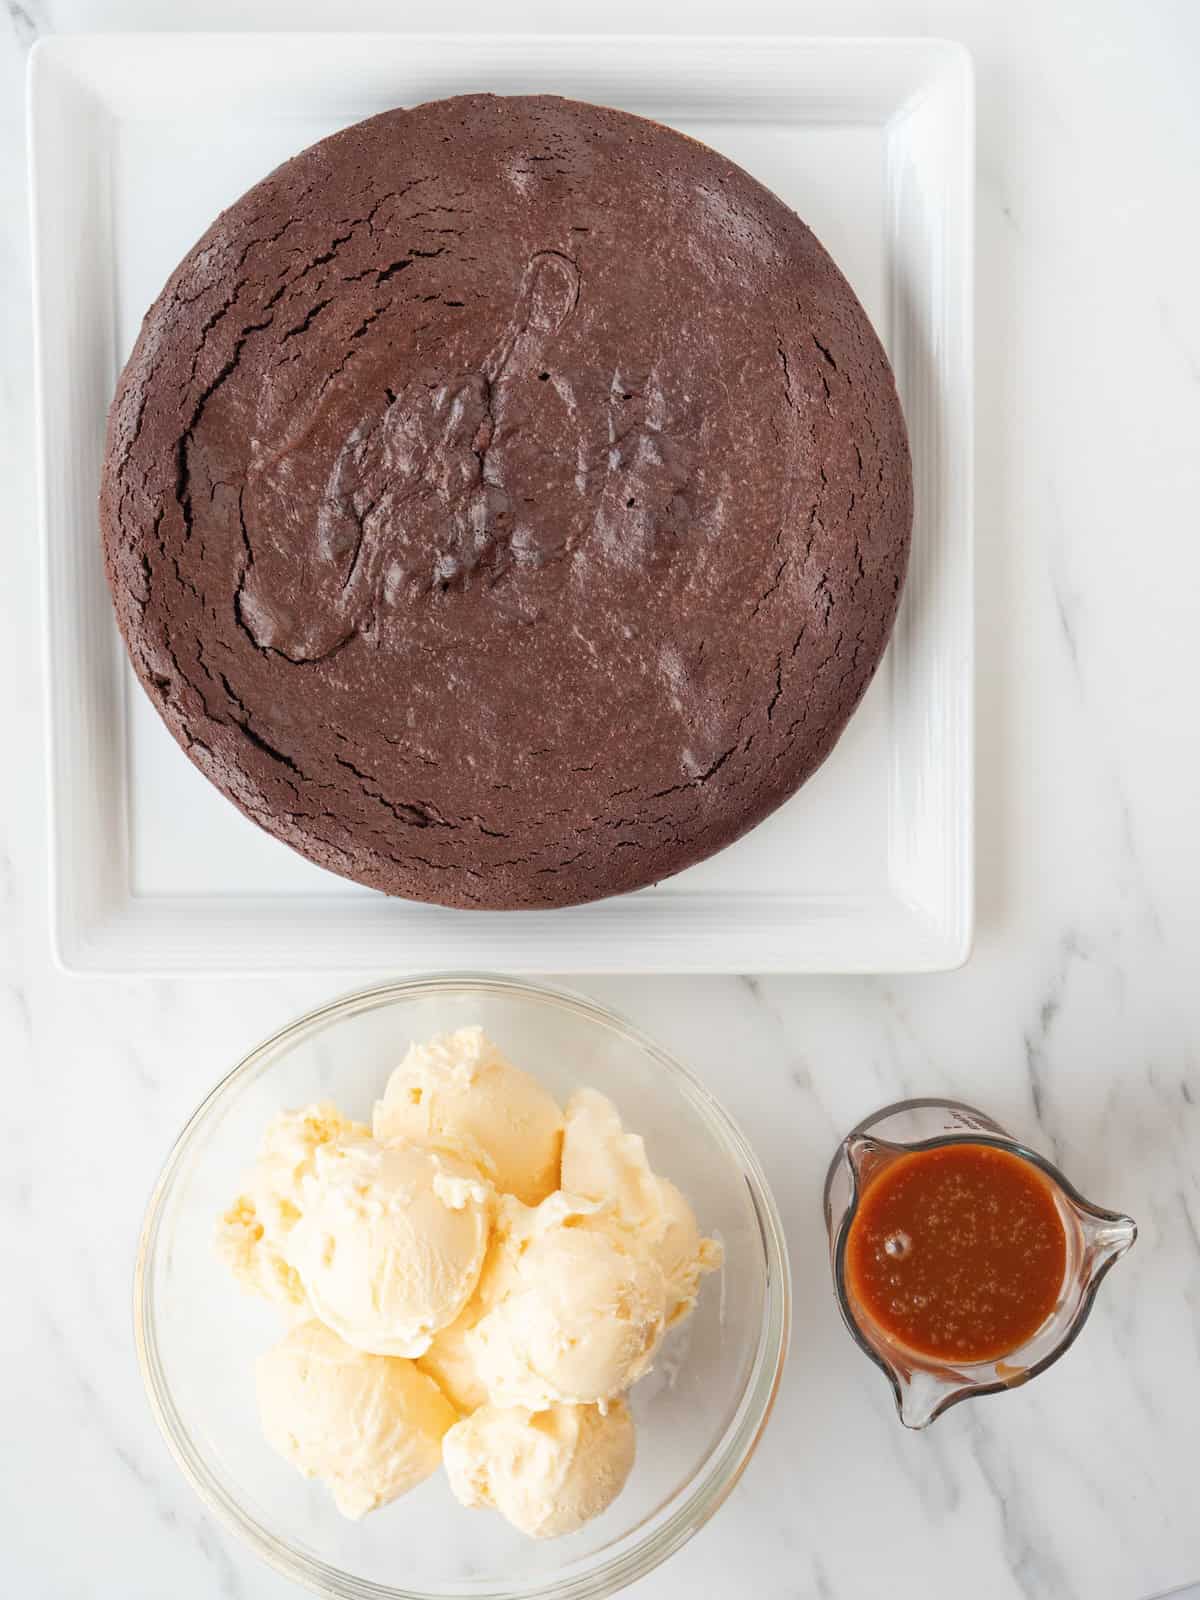 A square white plate with a round flourless chocolate cake, along with a glass mixing bowl with many scoops of vanilla ice cream, and a jar with caramel sauce on the side.